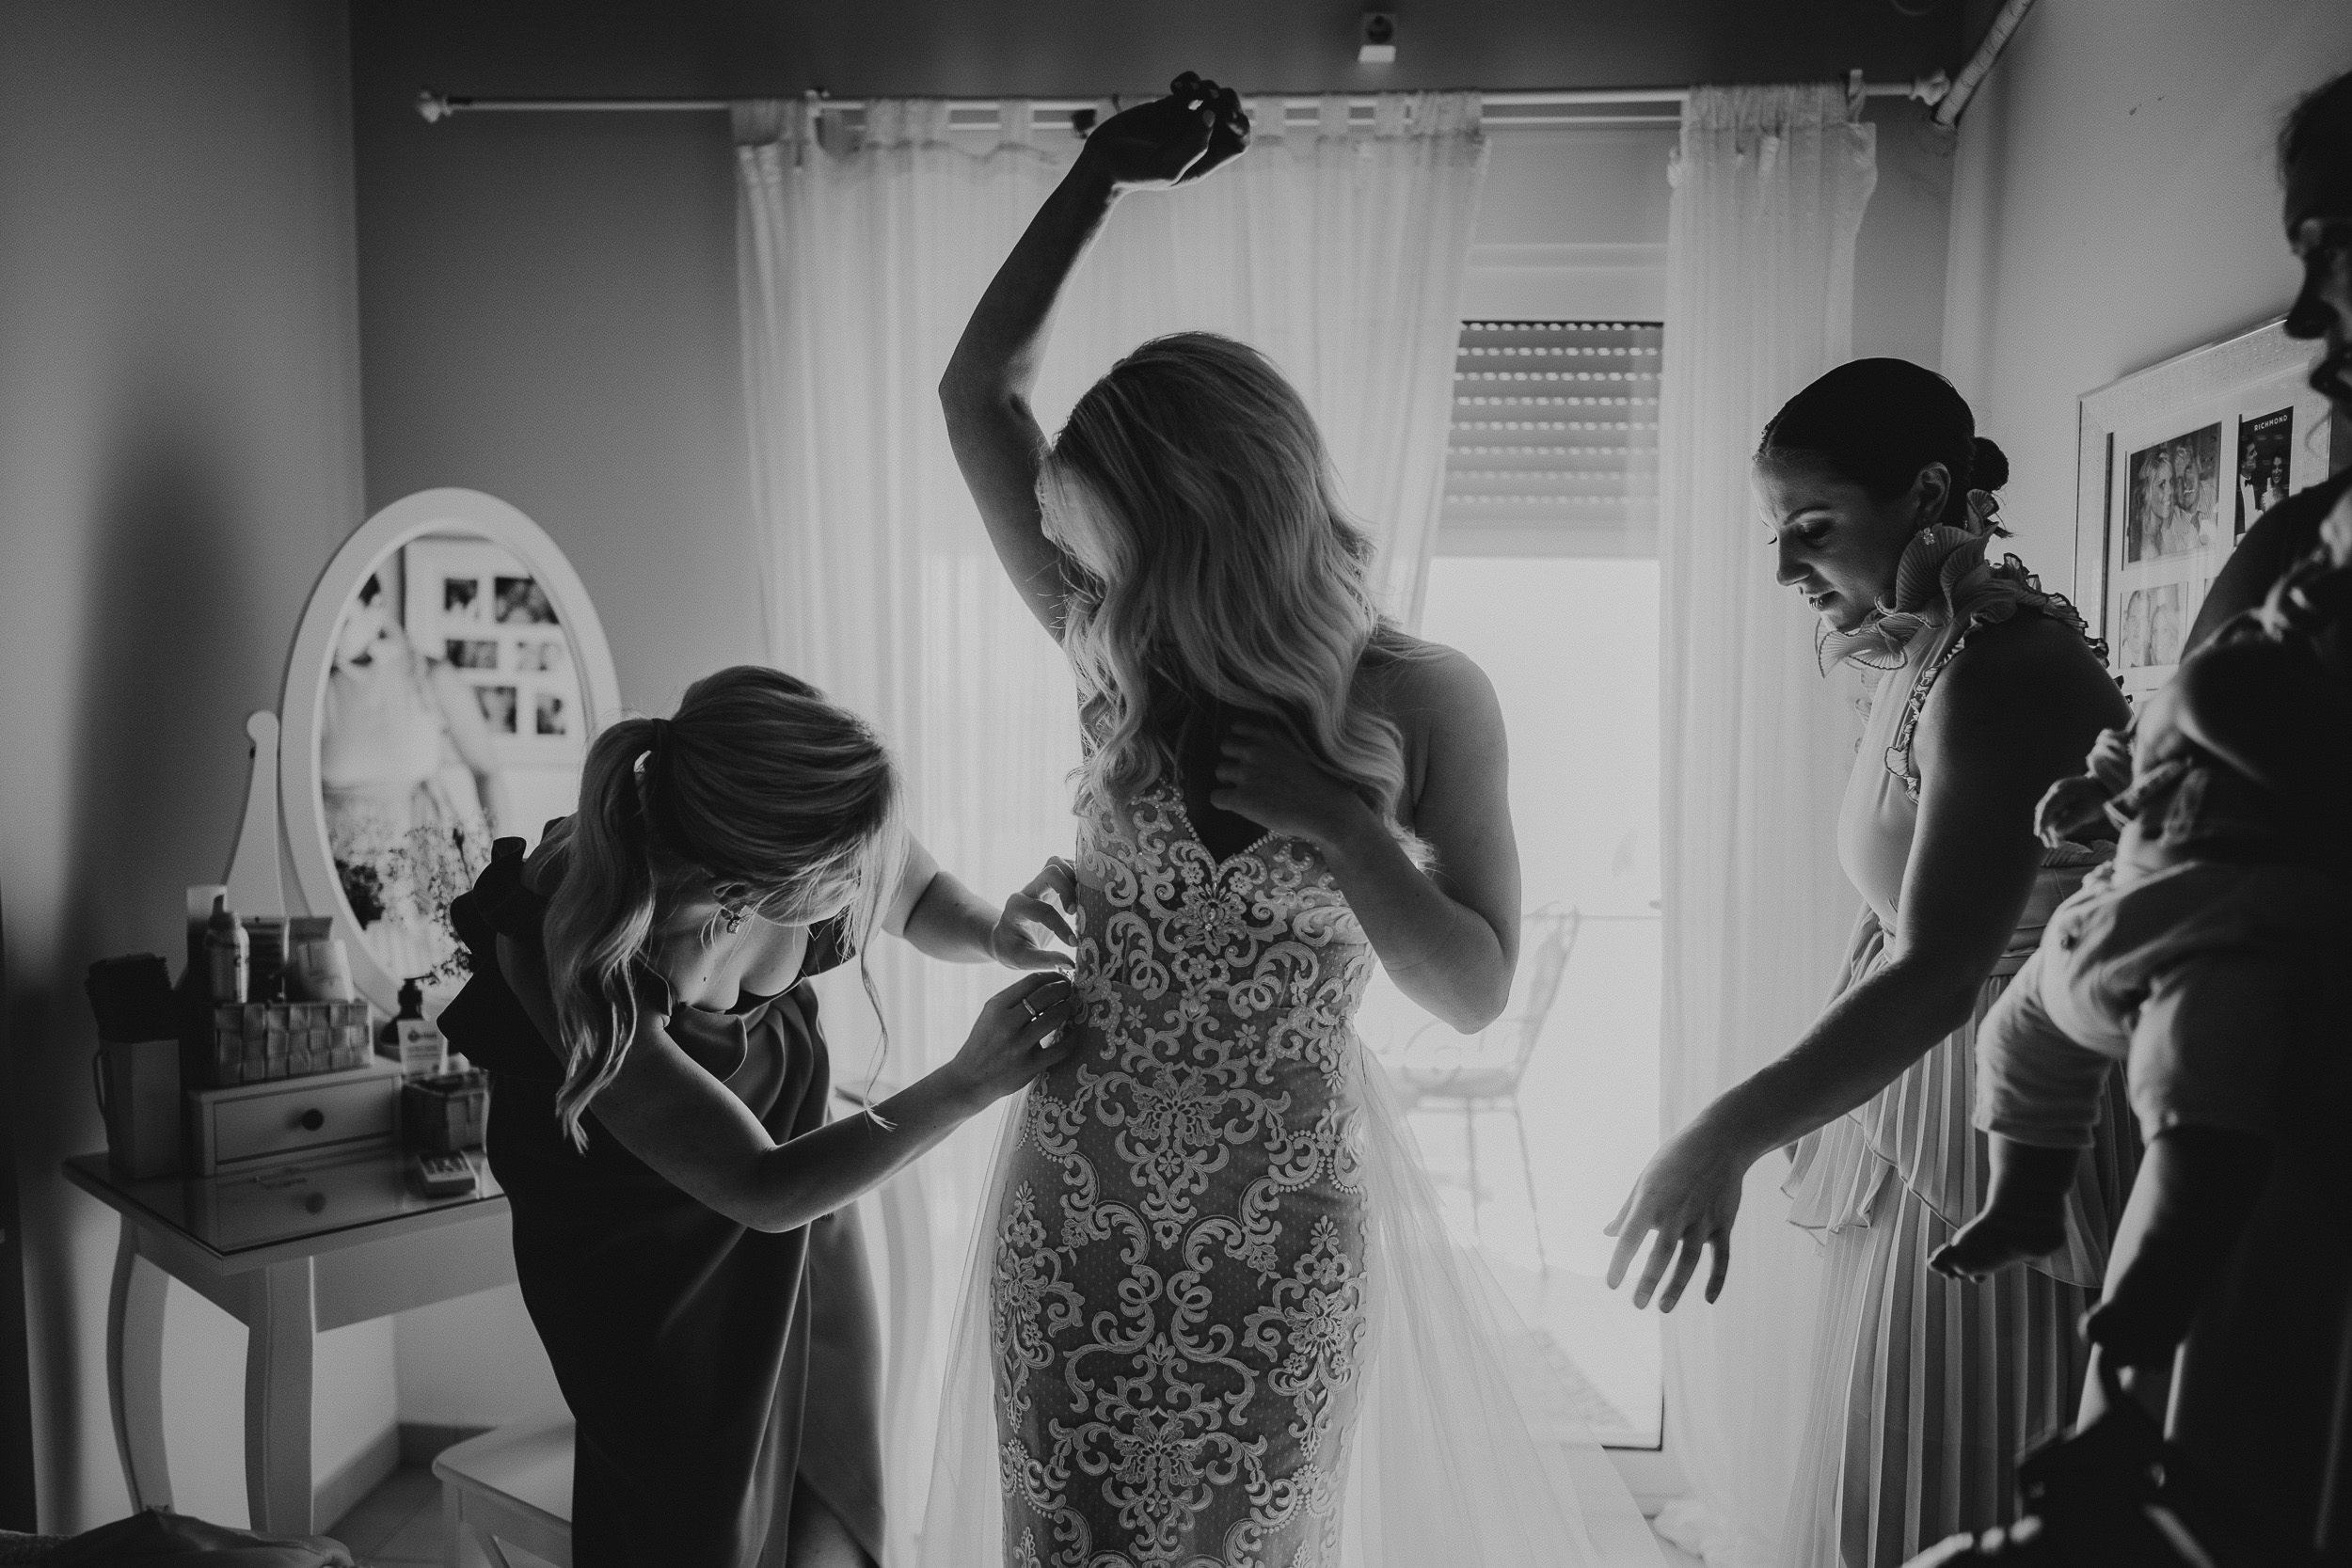 A bride getting ready for her wedding in Greece, joined by the groom.